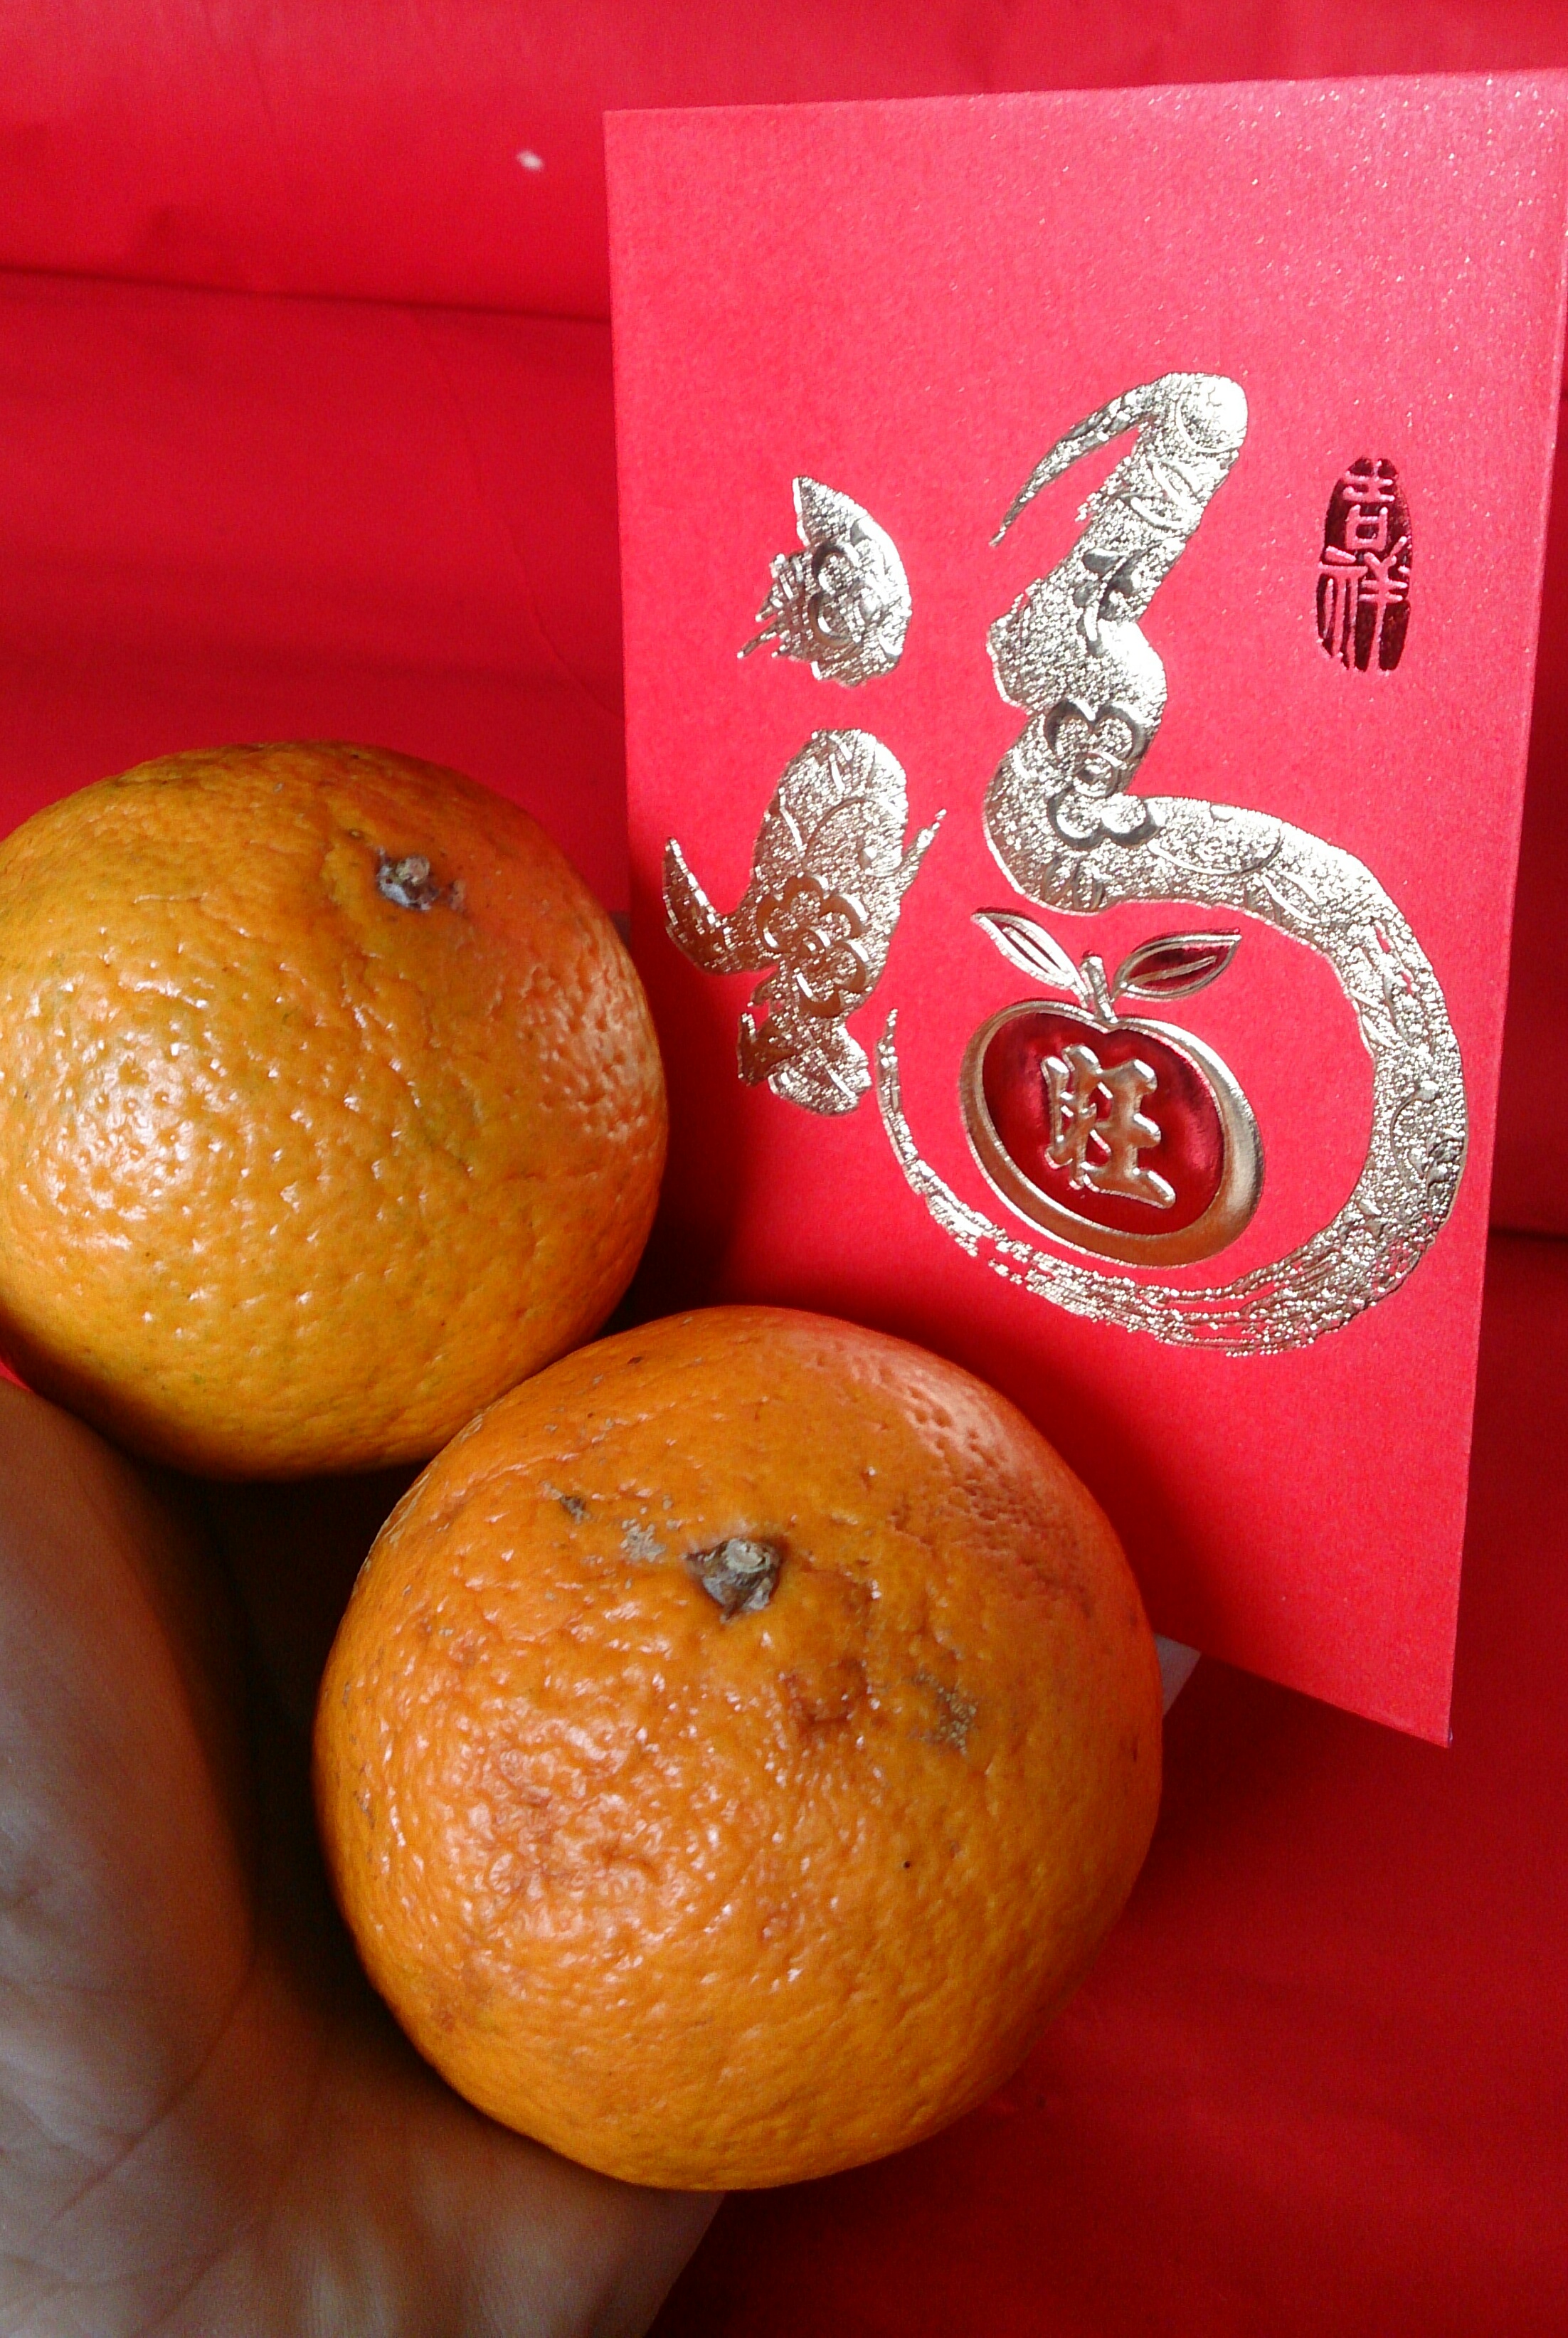 Oranges and red packet By ProjectManhattan - Own work, CC BY-SA 3.0, https://commons.wikimedia.org/w/index.php?curid=30756126